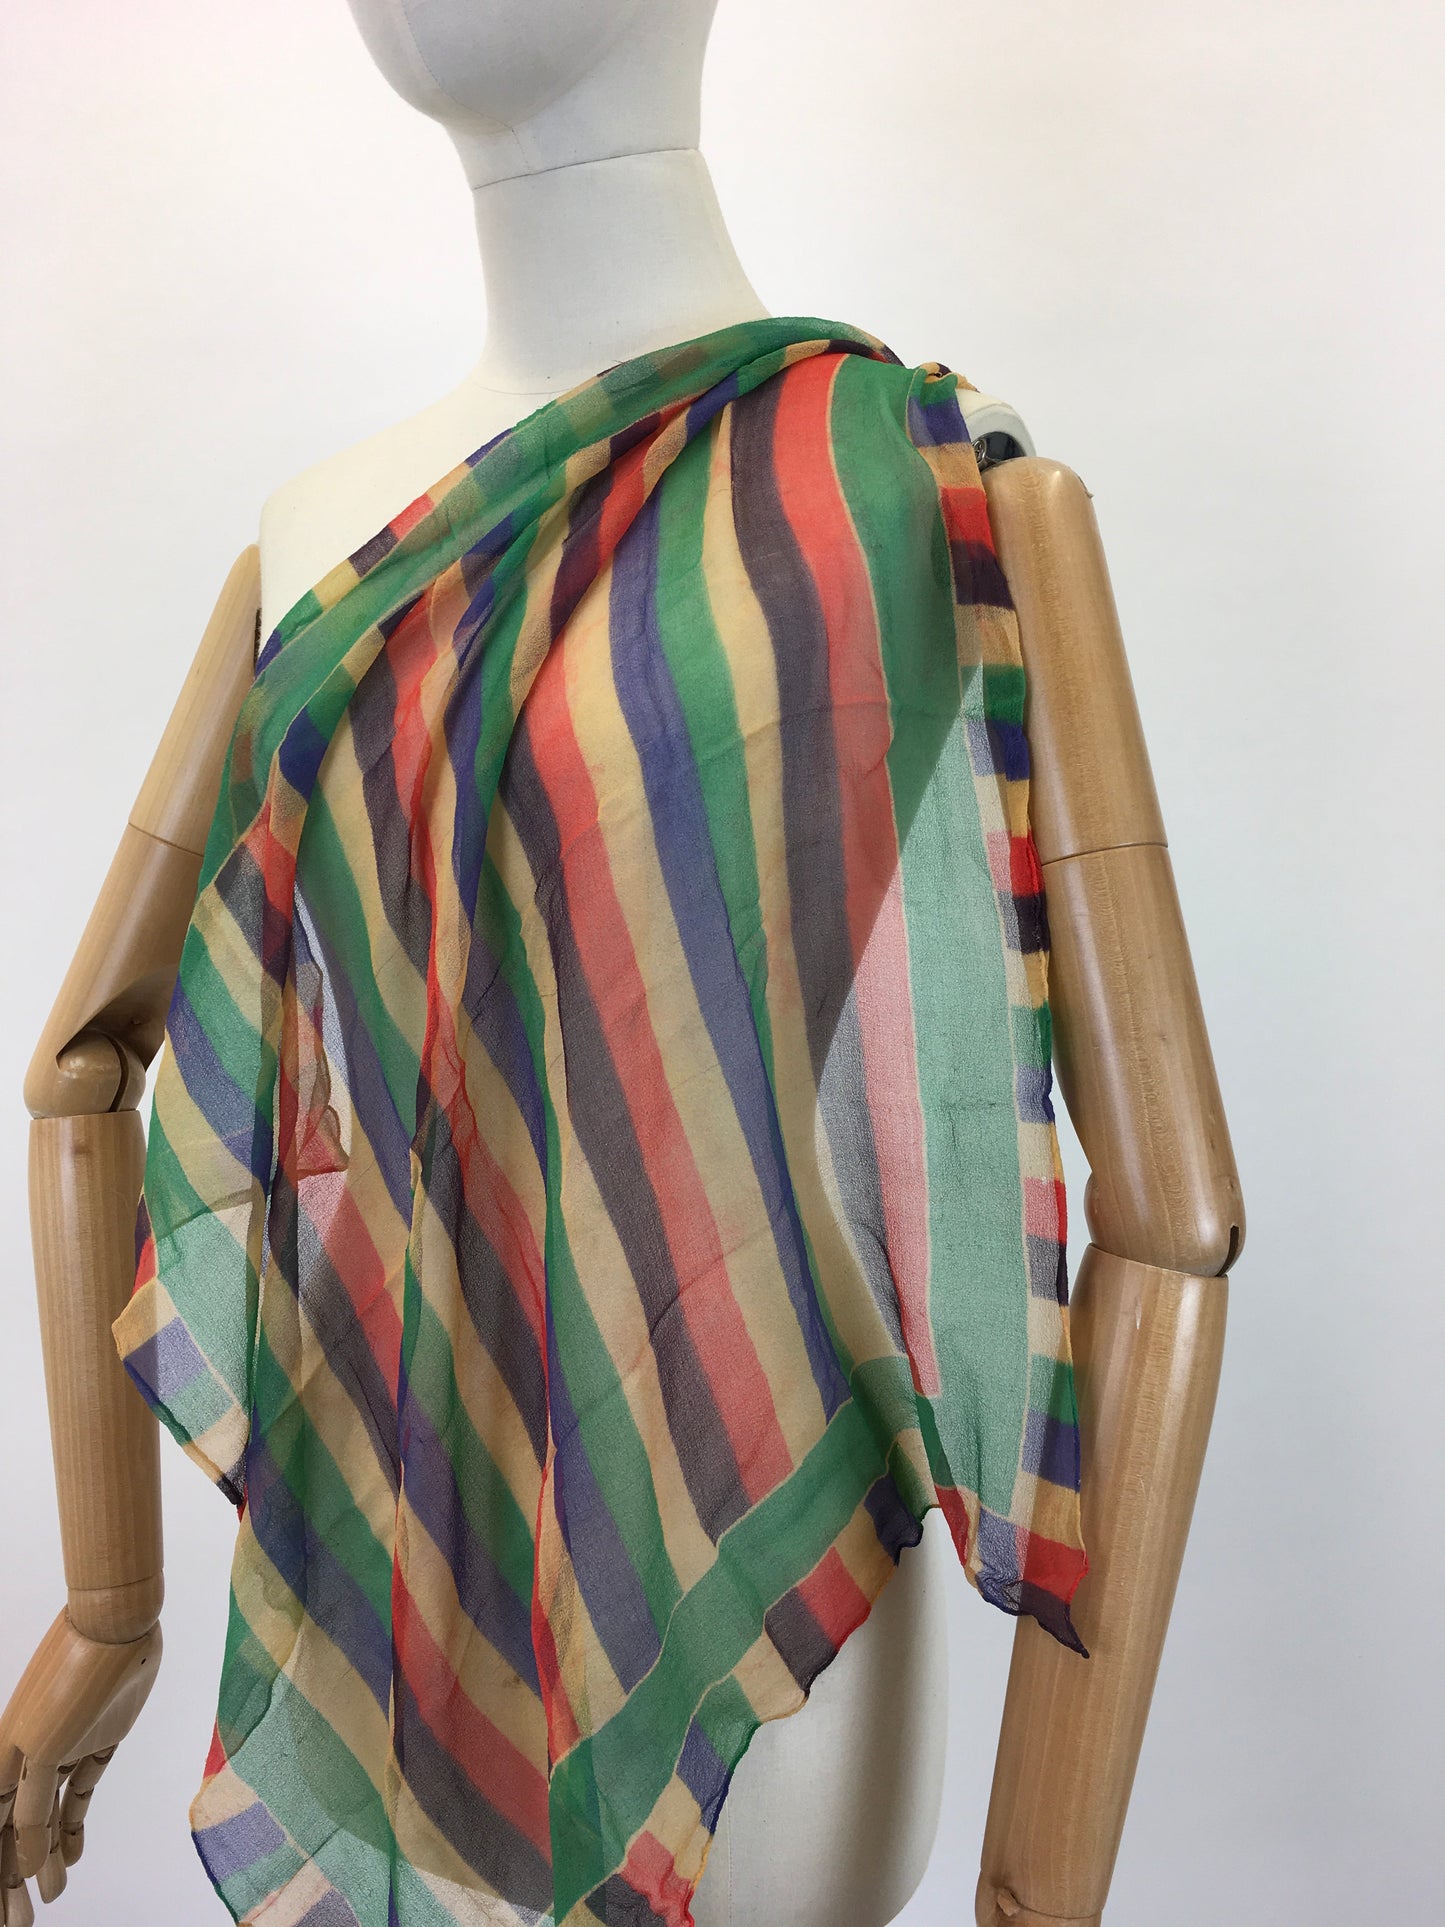 Original 1930's Exquisite Rainbow Chiffon Scarf - In Autumnal Brights of Burnt Orange, Green, Yellow and Blue